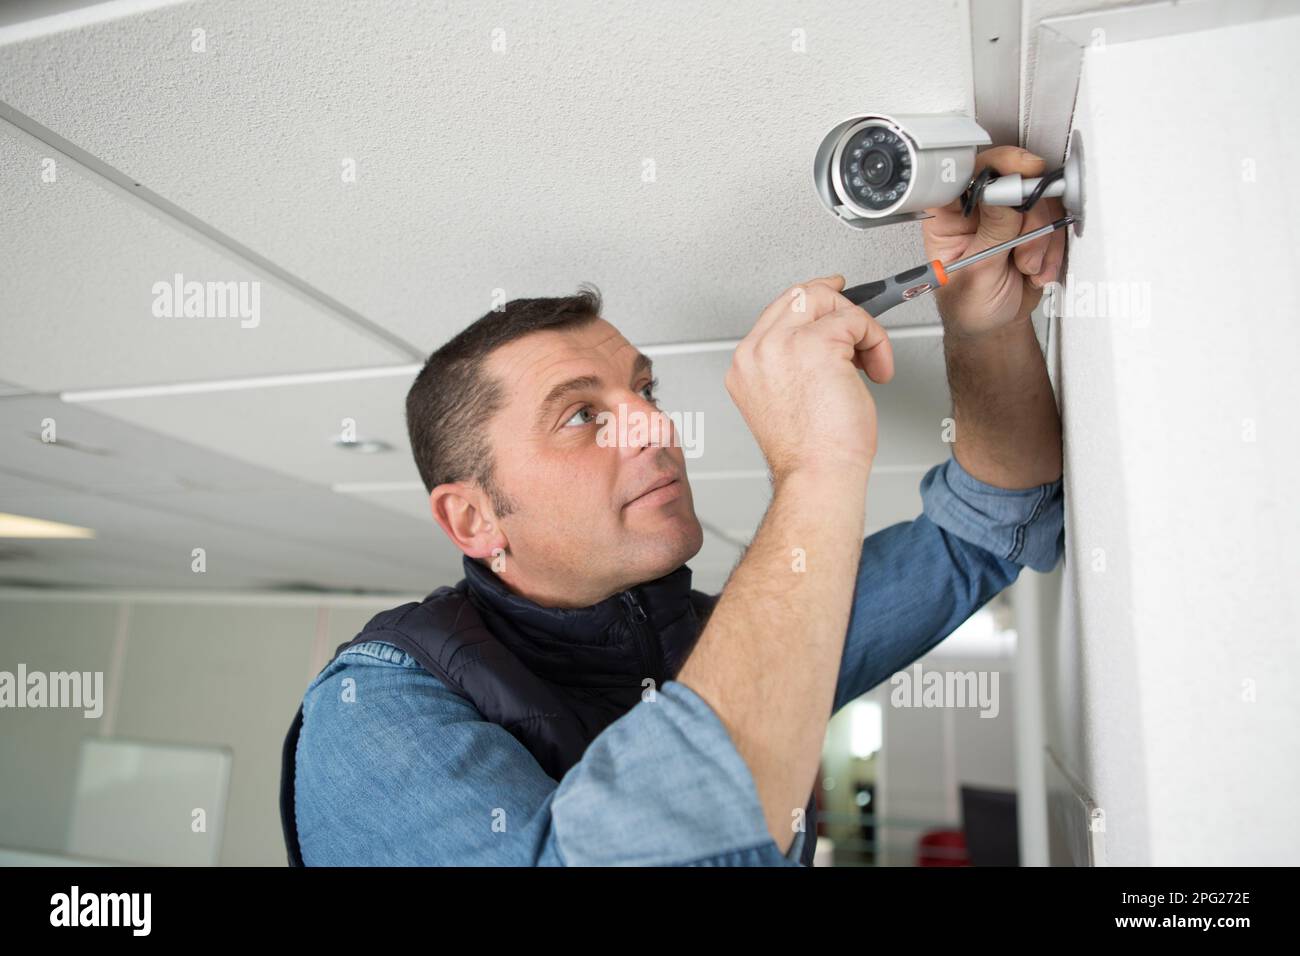 technician or contractor with cctv security camera Stock Photo